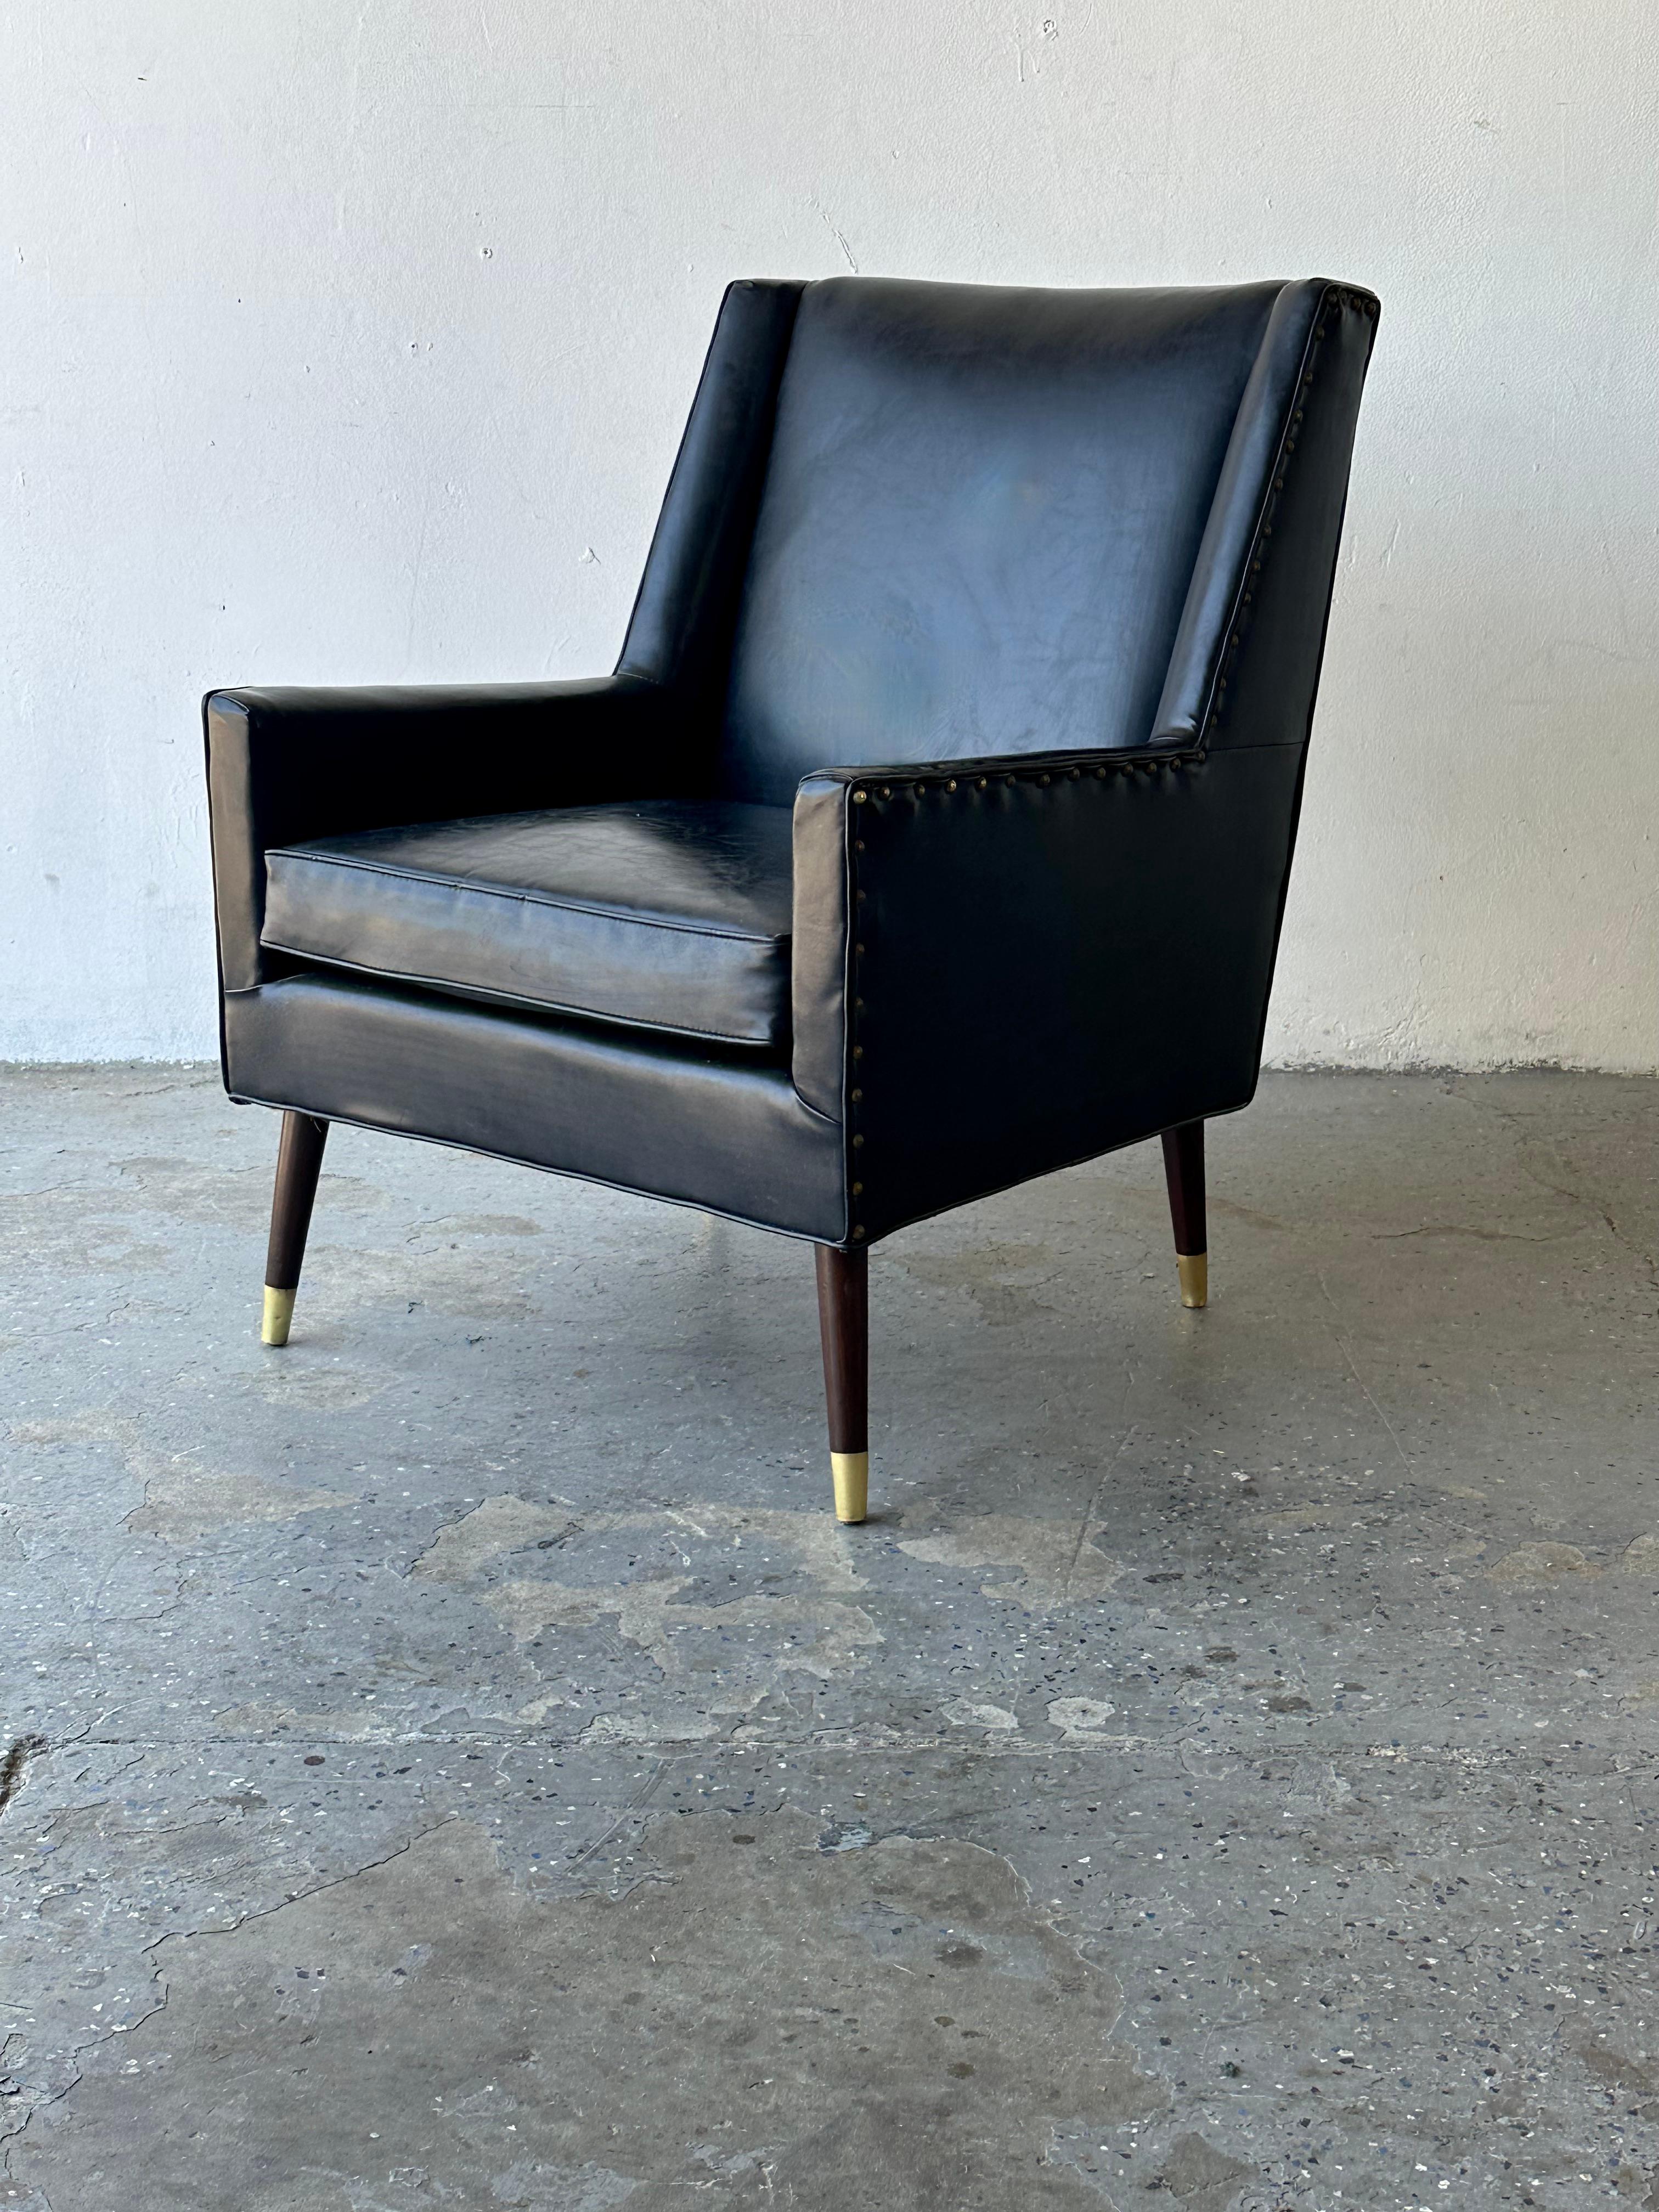 This chic 1950s Mid-Century Modern Armchair has a beautiful Classic shape and sleek wood legs with brass caps. Nice beaded detail that extends from the sides to the back, this is a beautiful piece of furniture. Every side of this chair is a pleasure